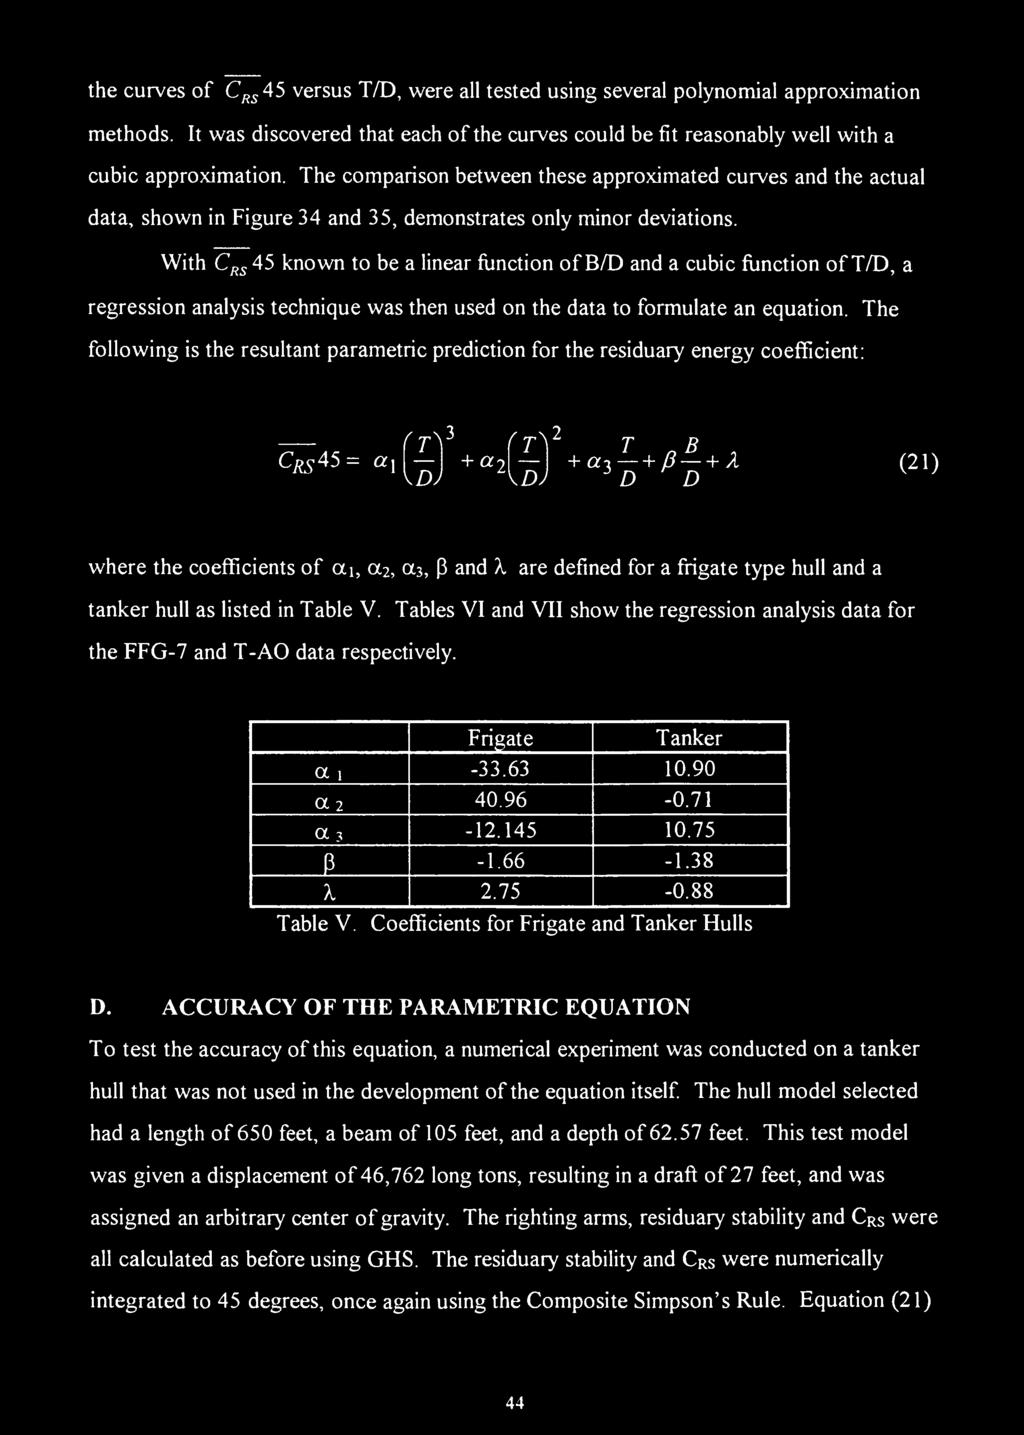 With C R5 45 known to be a linear function of B/D and a cubic function of T/D, a regression analysis technique was then used on the data to formulate an equation.